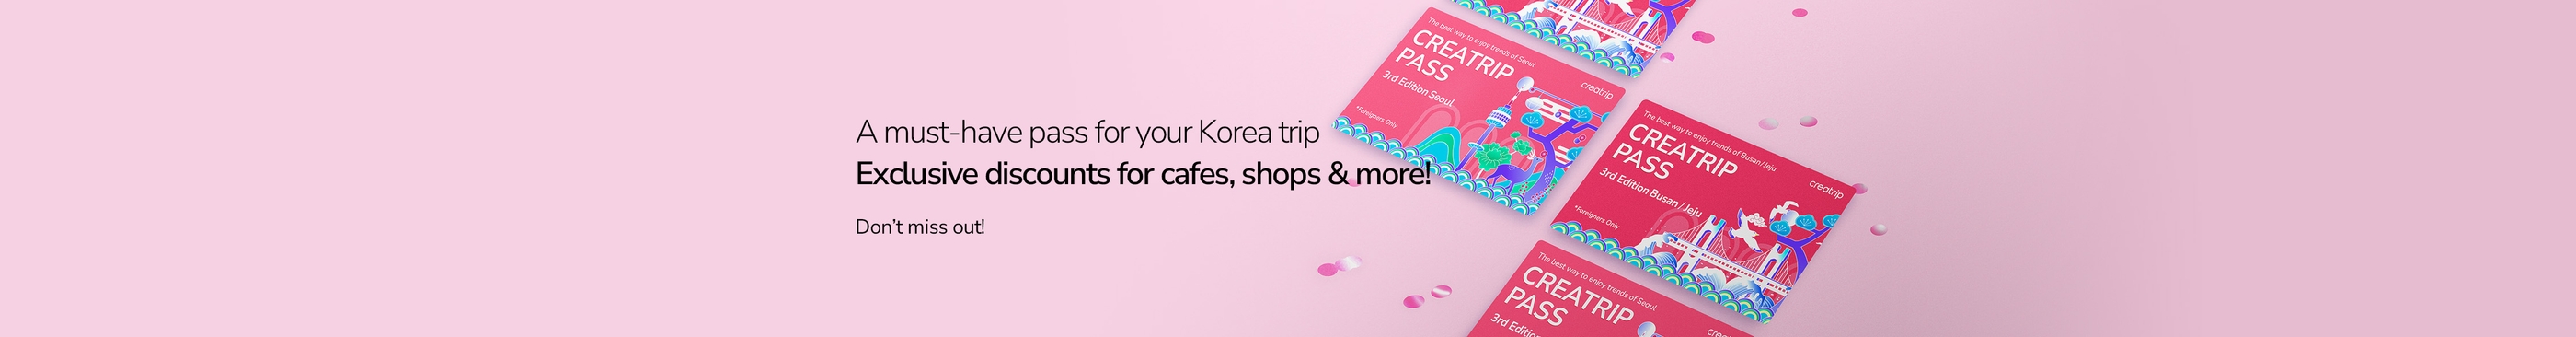 Enjoy various perks and discounts with Creatrip!